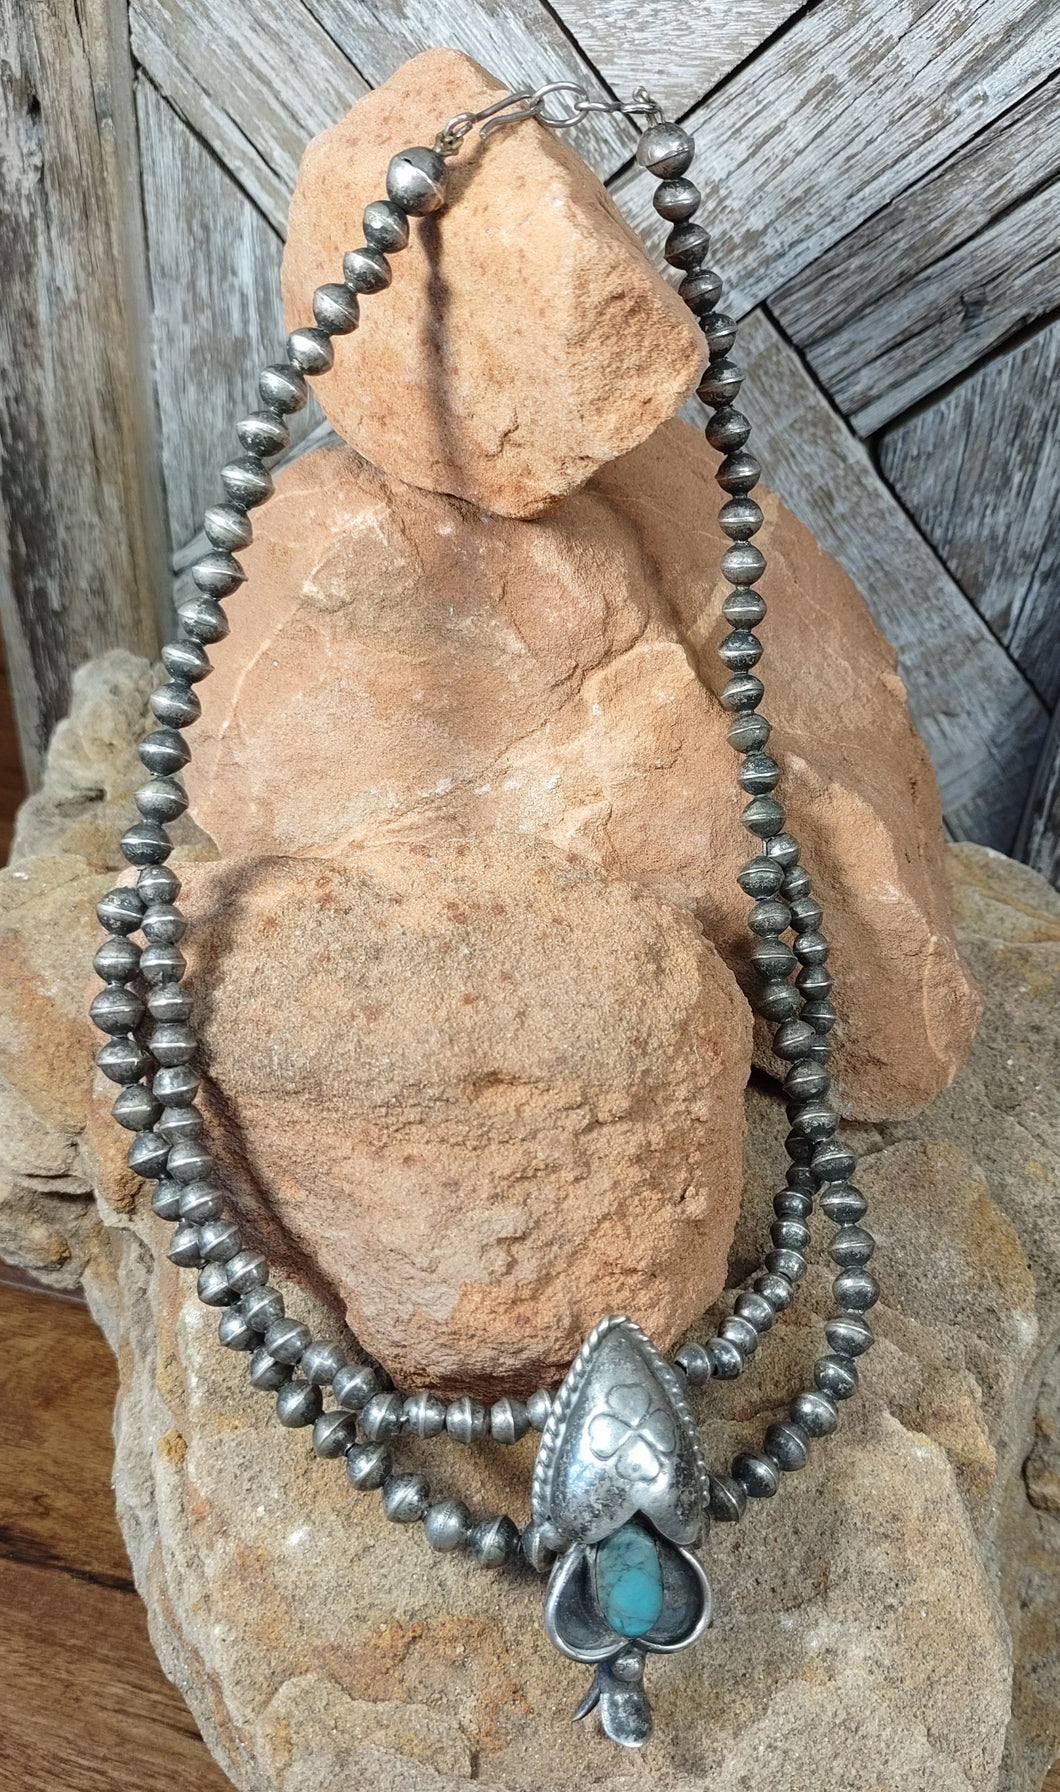 Single Squash Blossom Necklace with 2 Strands of Navajo Pearl beads